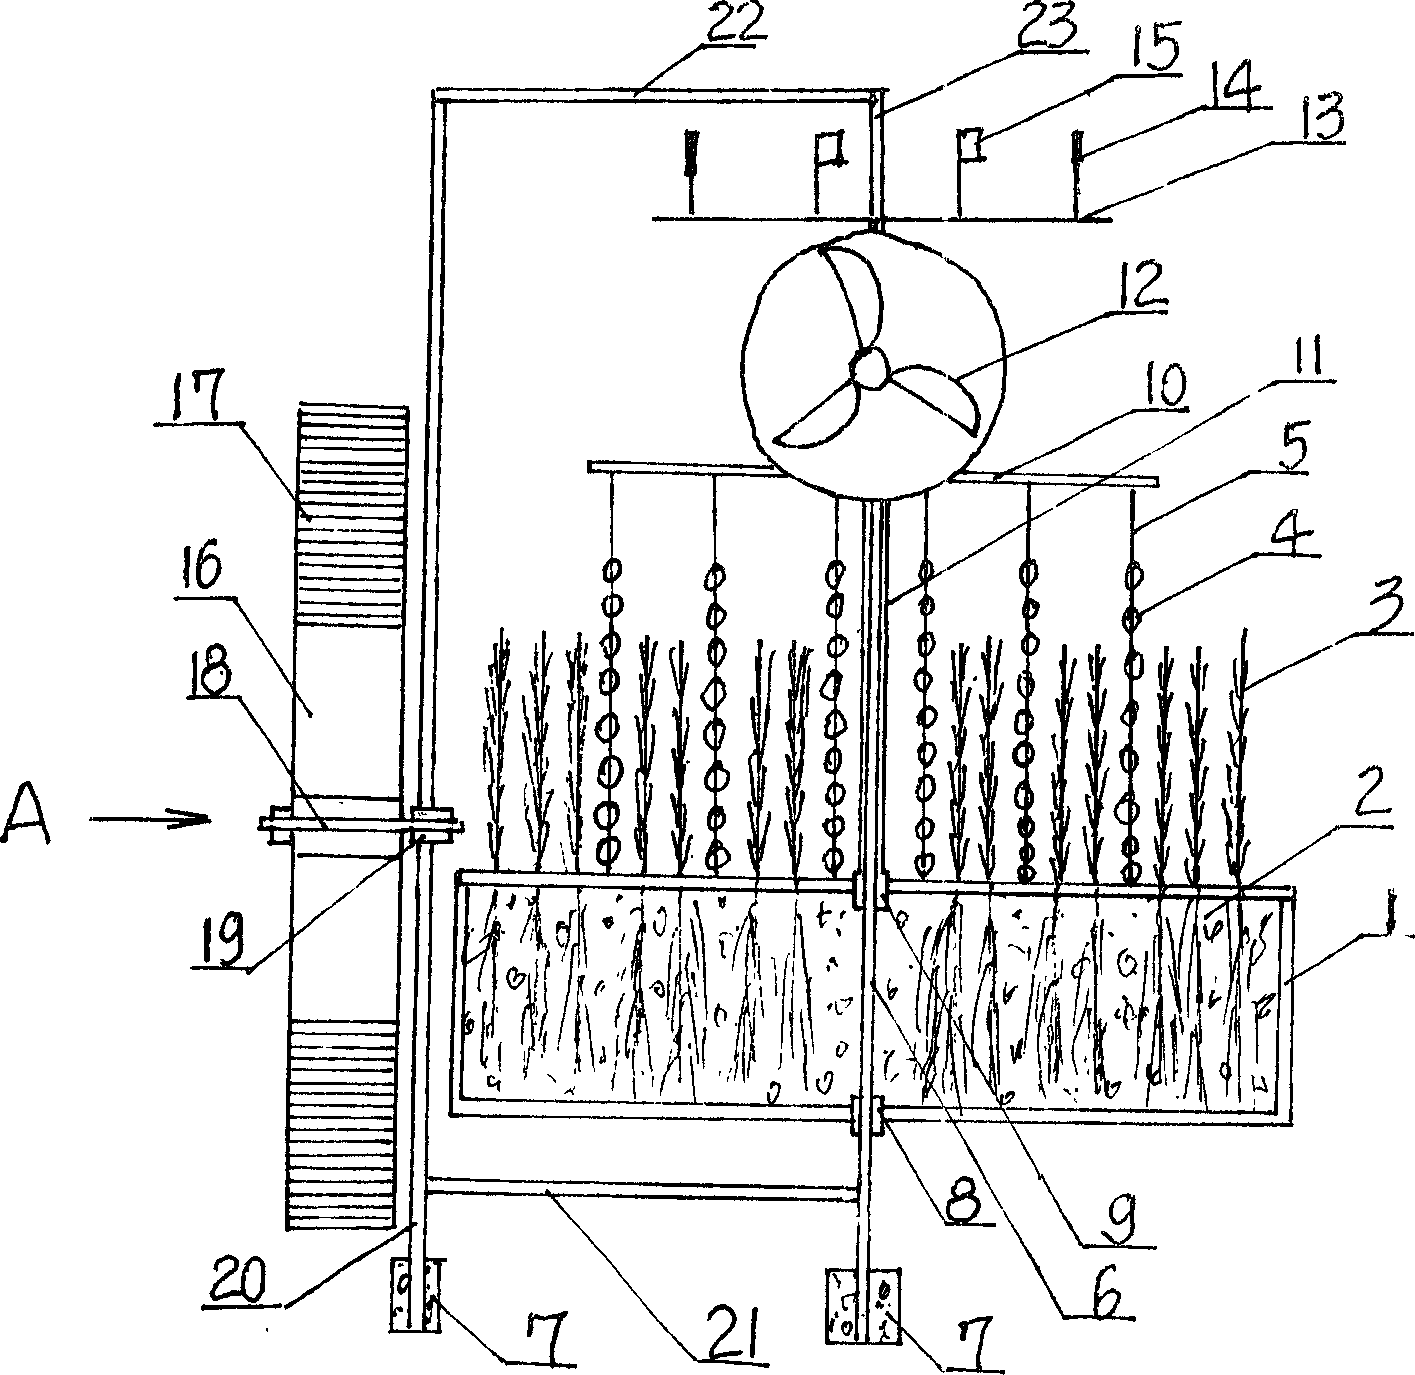 In-situ remediation ecologic reactor for water body